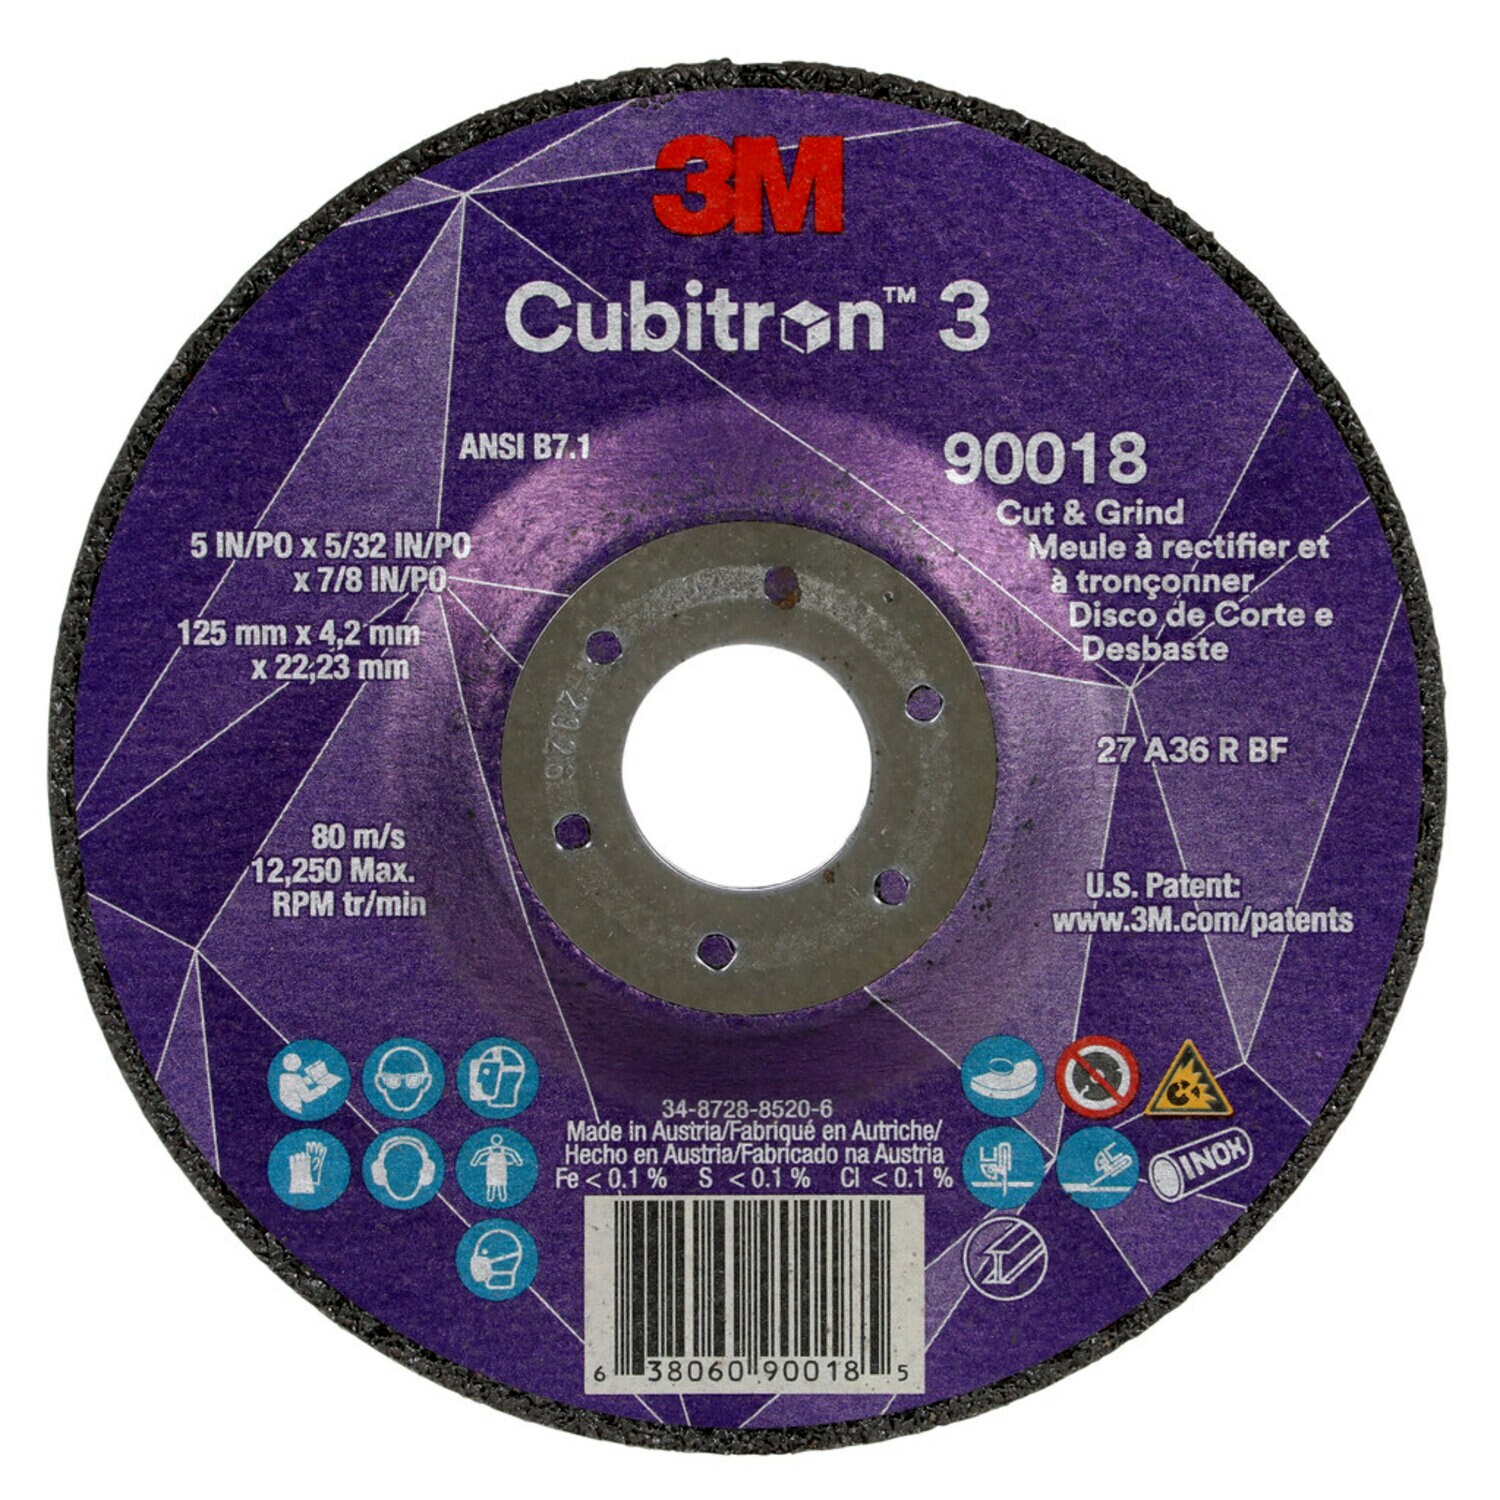 7100305444 - 3M Cubitron 3 Cut and Grind Wheel, 90018, 36+, T27, 5 in x 5/32 in
x7/8 in (125 x 4.2 x 22.23 mm), ANSI, 10/Pack, 20 ea/Case